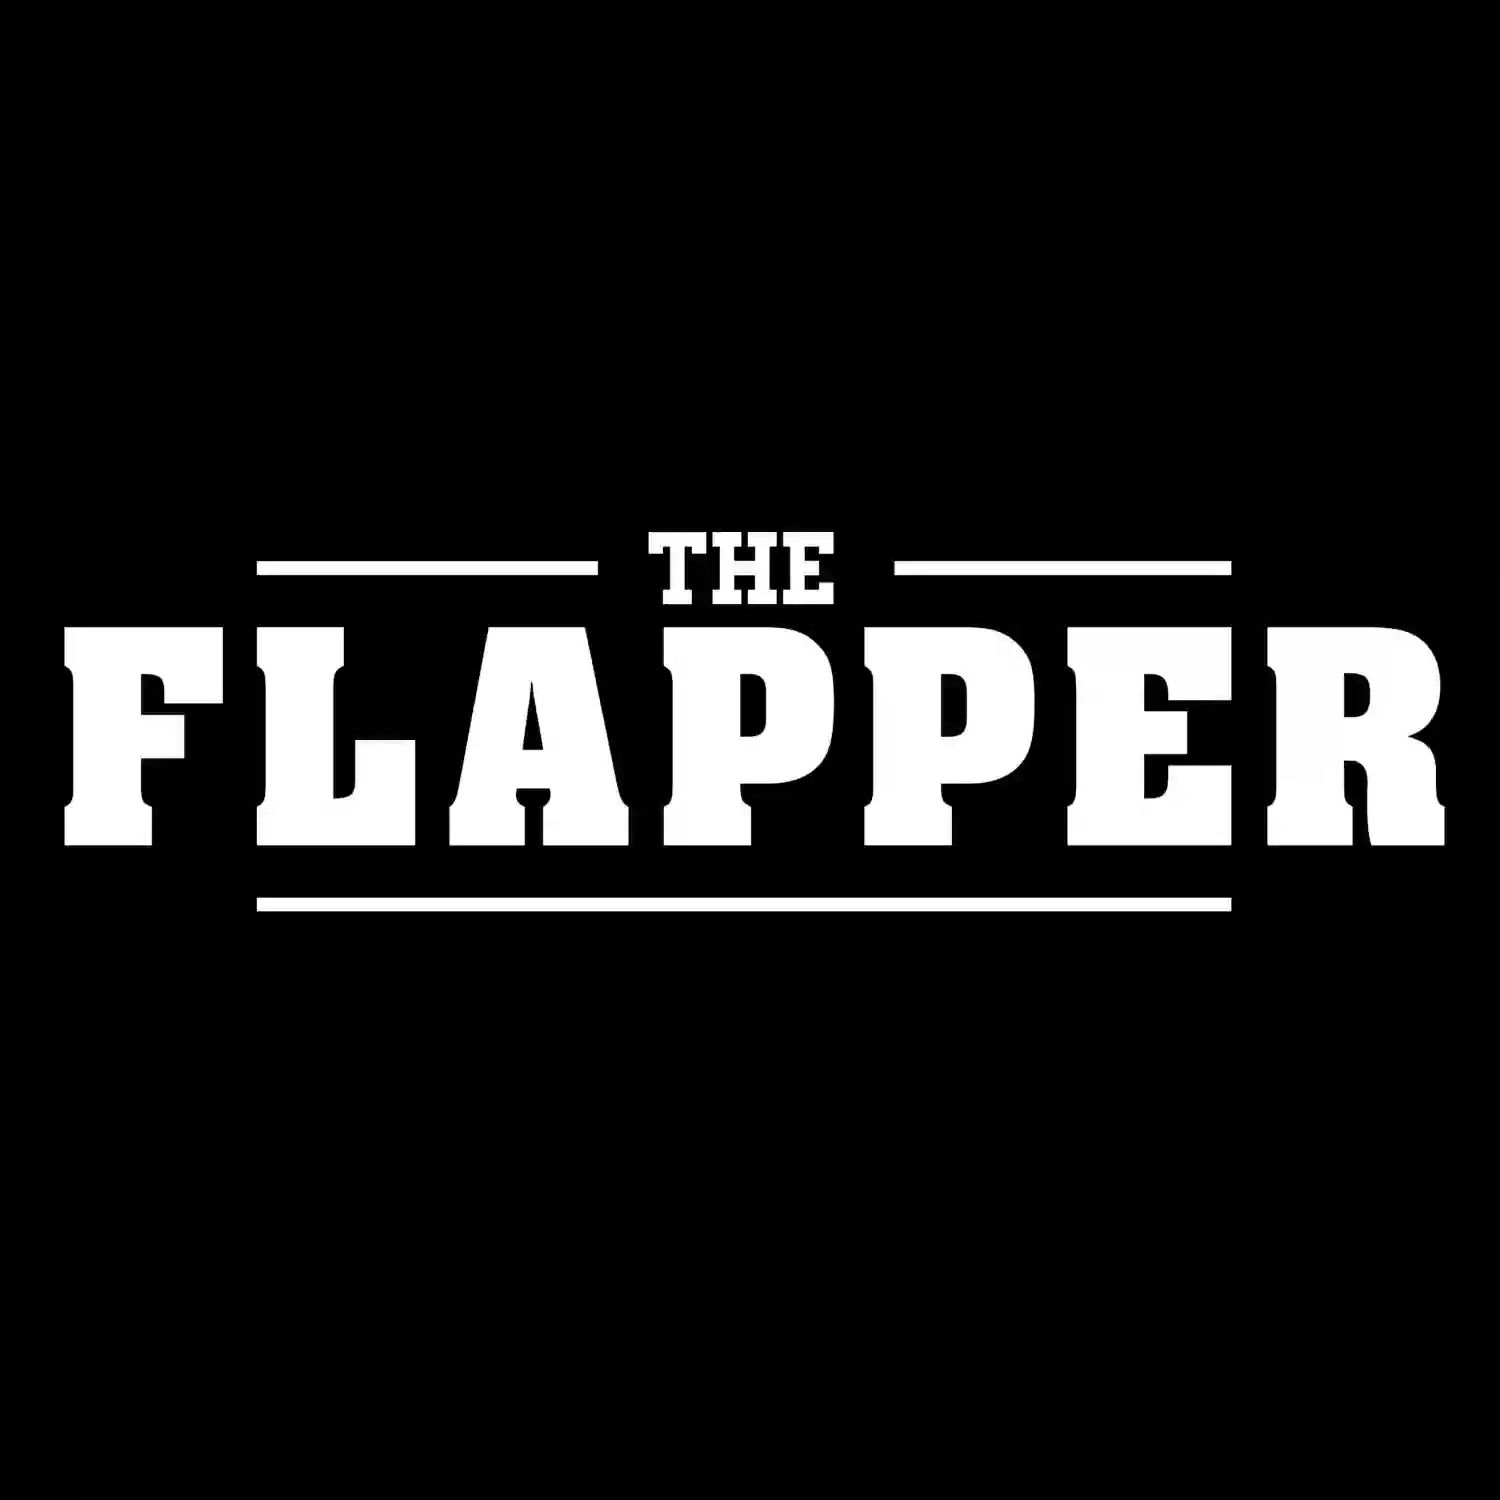 The Flapper